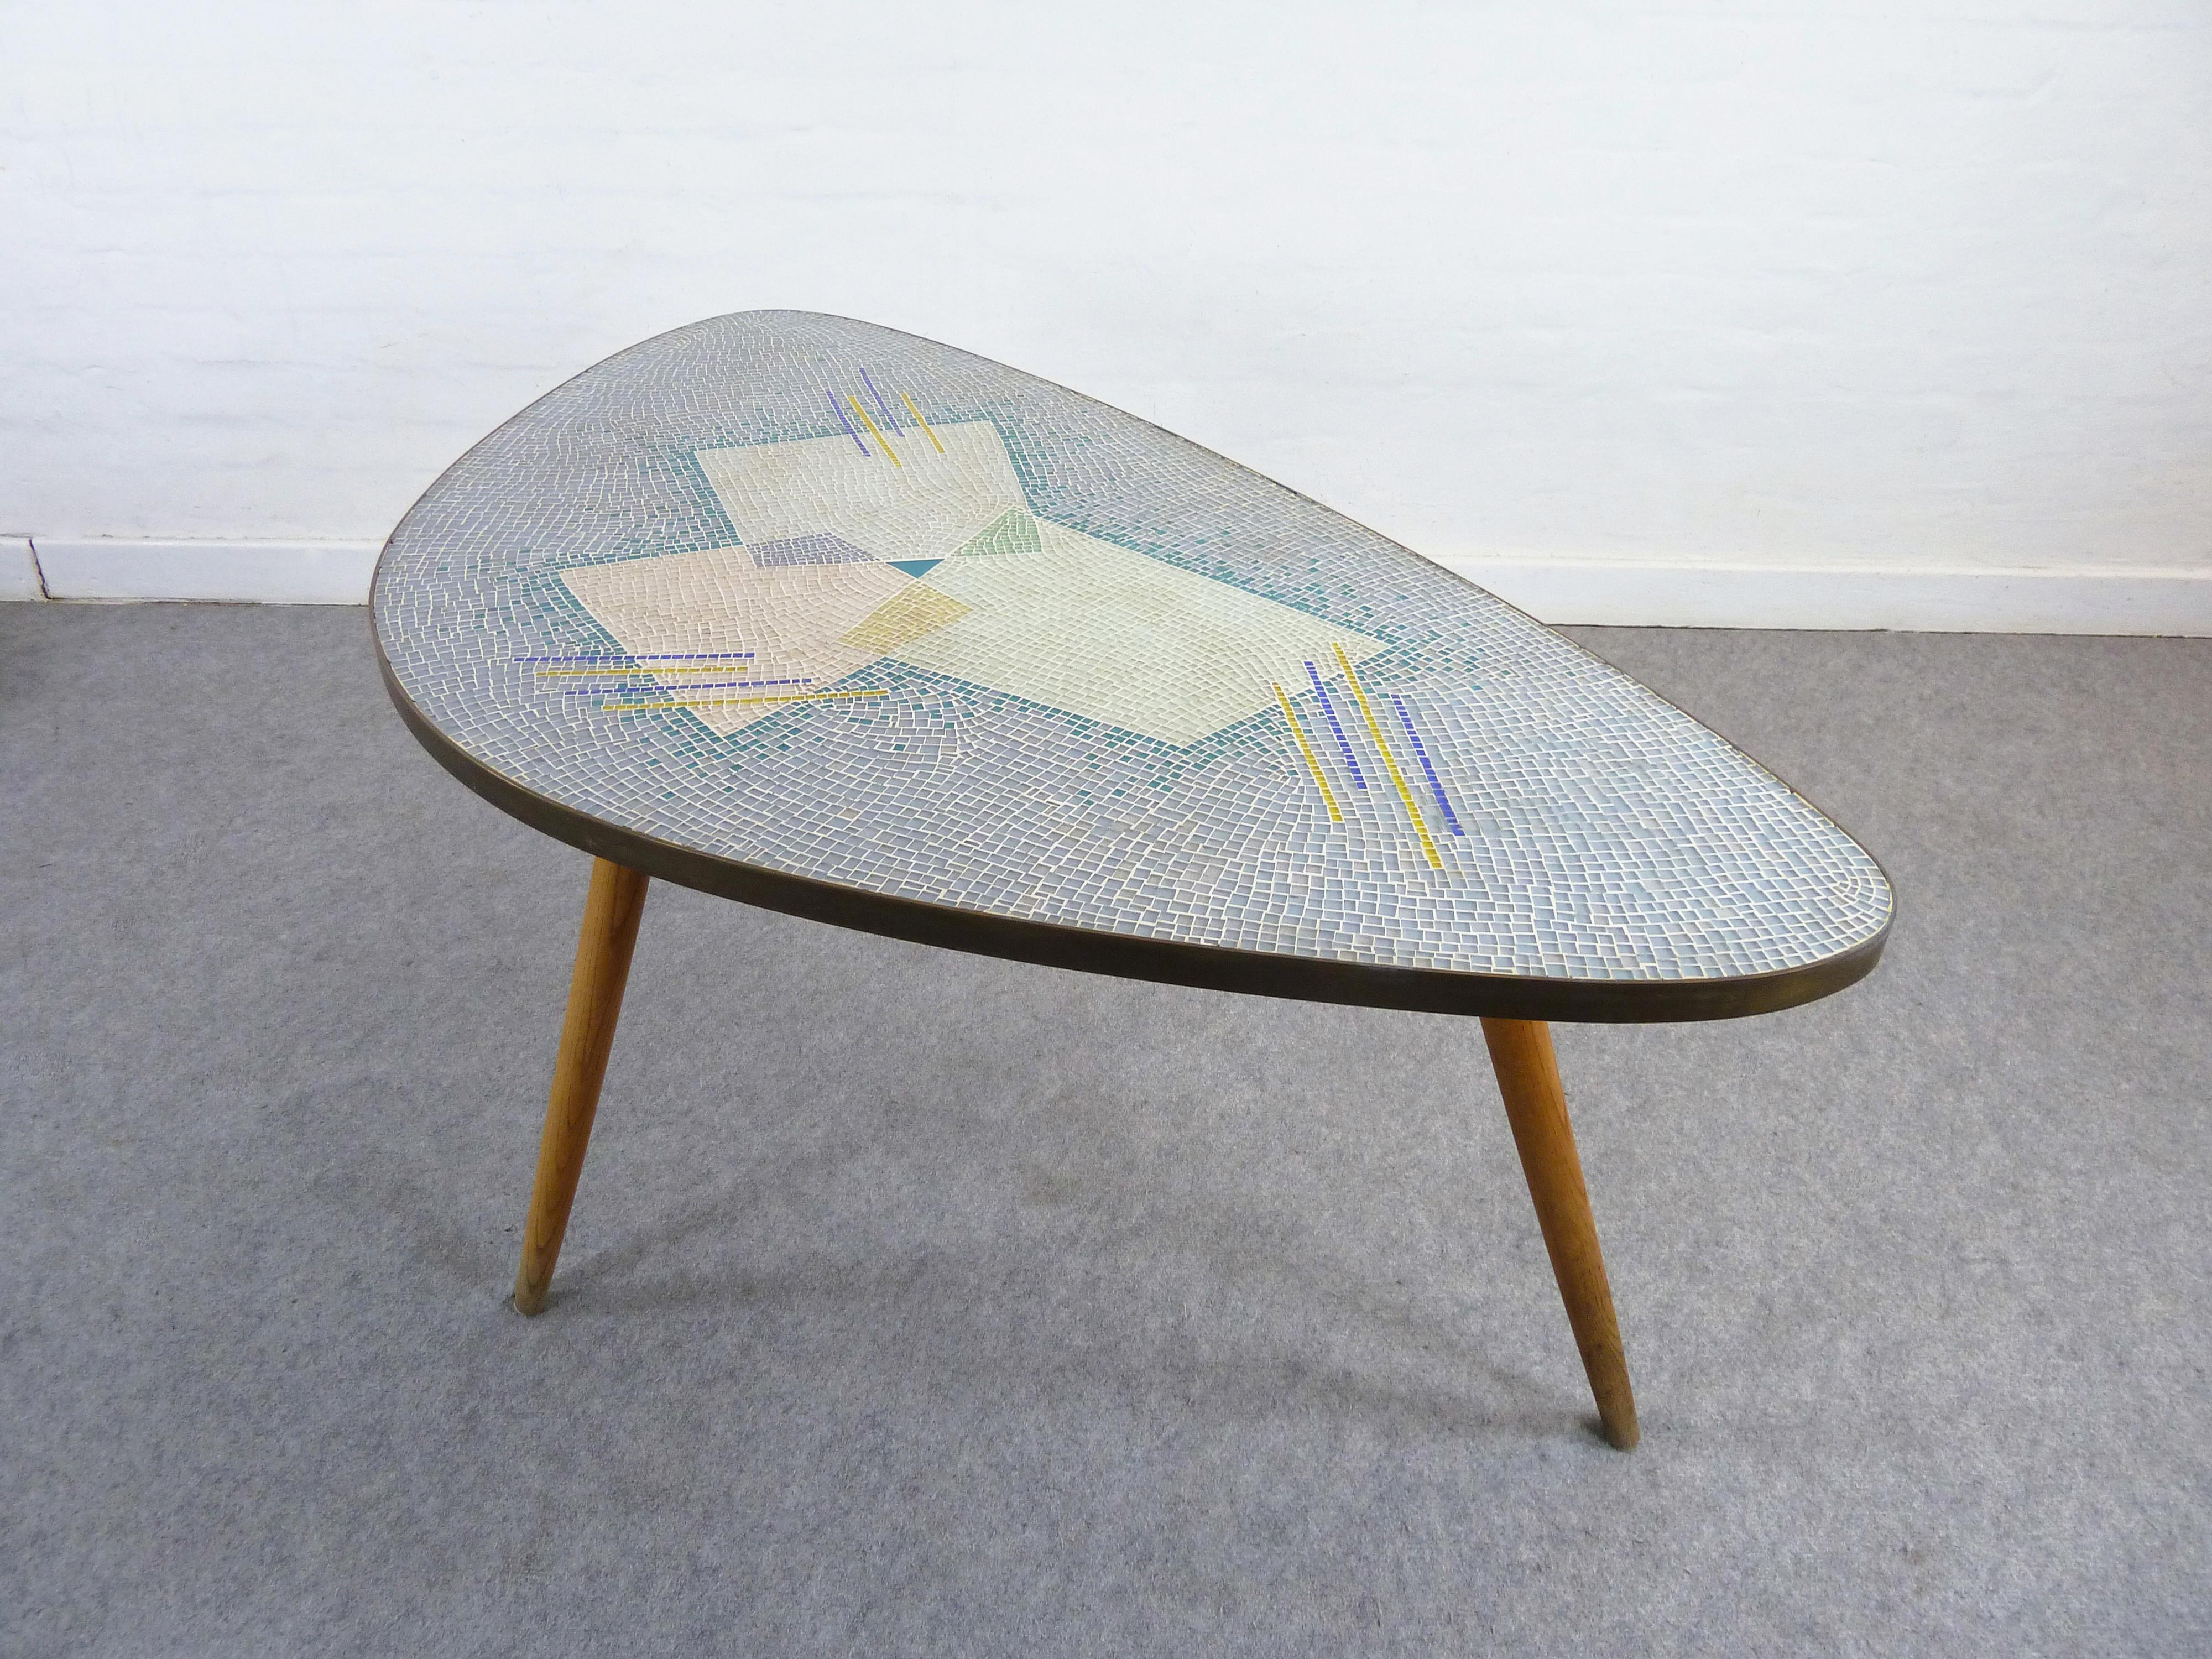 A 1950s Glas-Mosaic table by German Artist Berthold Muller-Oerlighausen (1893-1979).
Very nice pastel colors and a elegant organic form is here combined to create a nearly perfect icon of the 1950s.
The glas tiles inlay give this table a brilliant